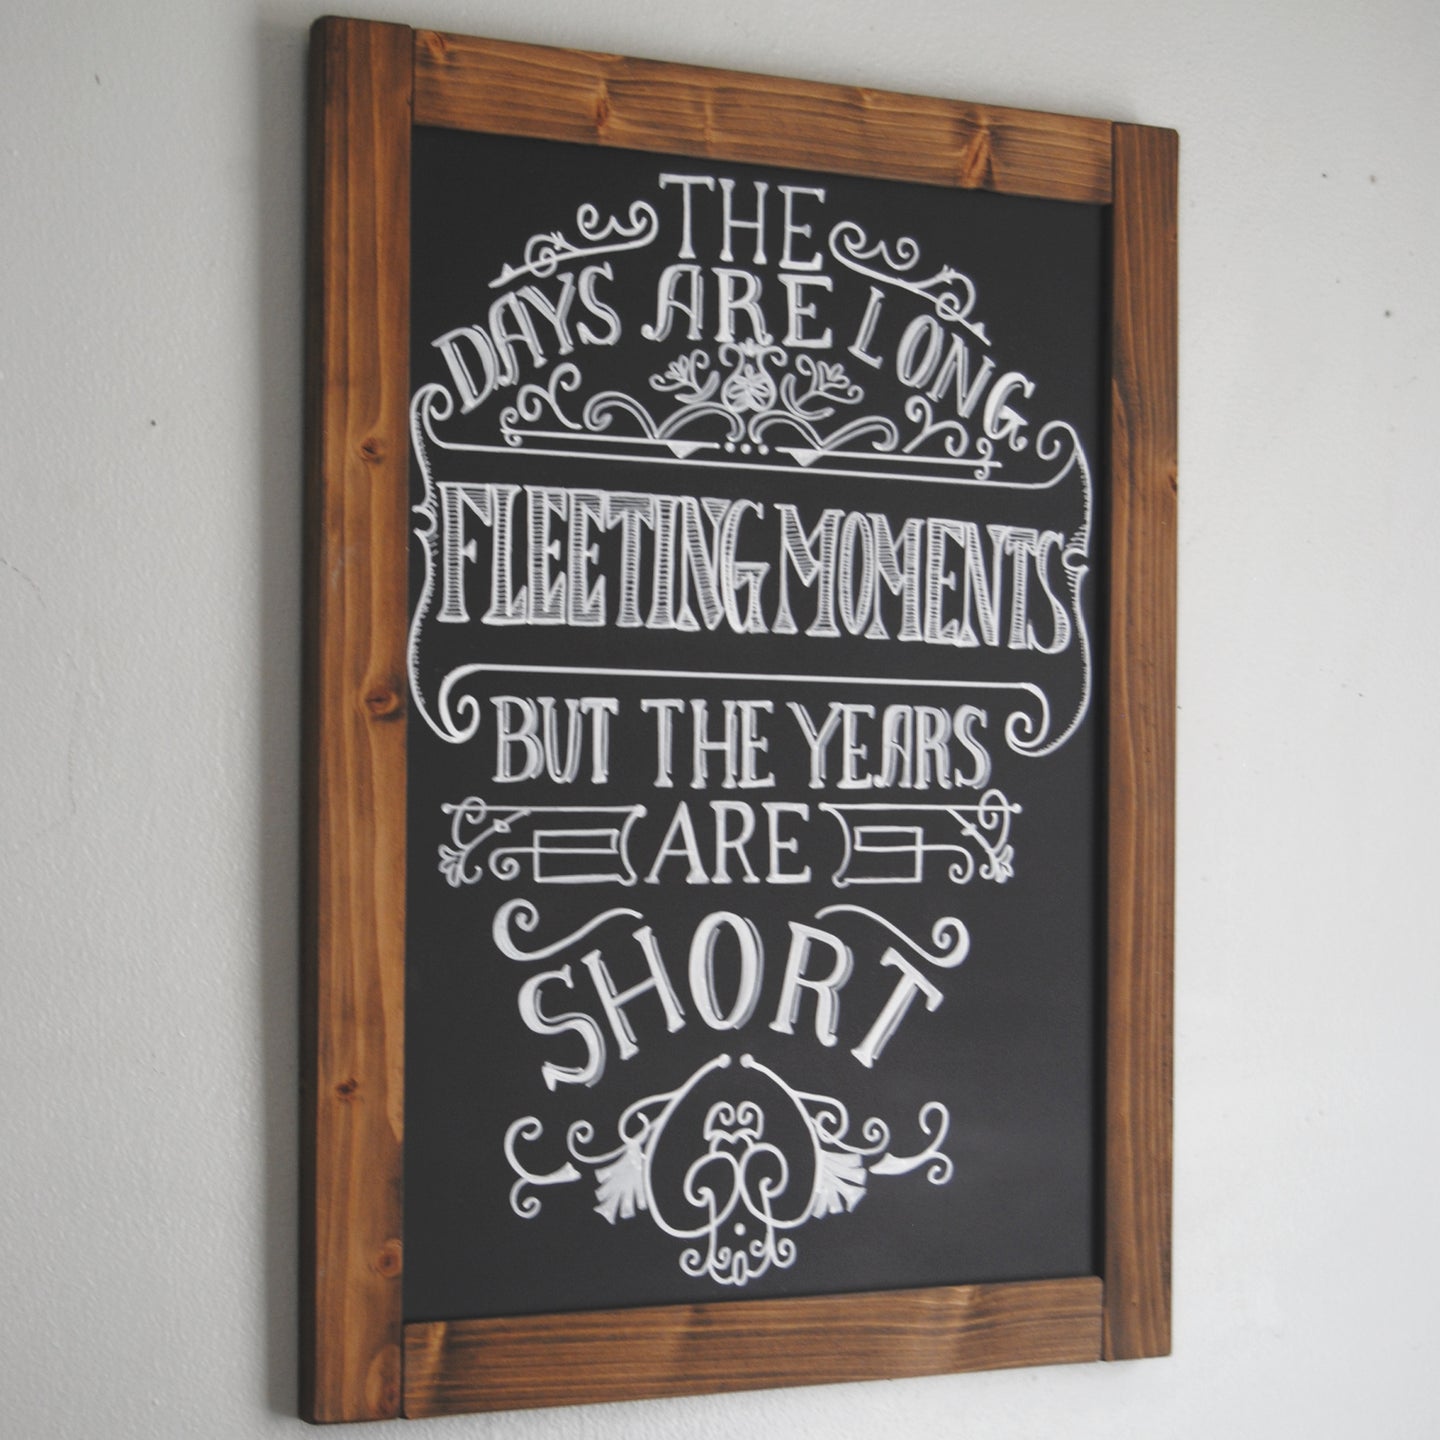 Wall Hanging Chalkboard Sign with Dark Walnut Frame - 16x20 Inches